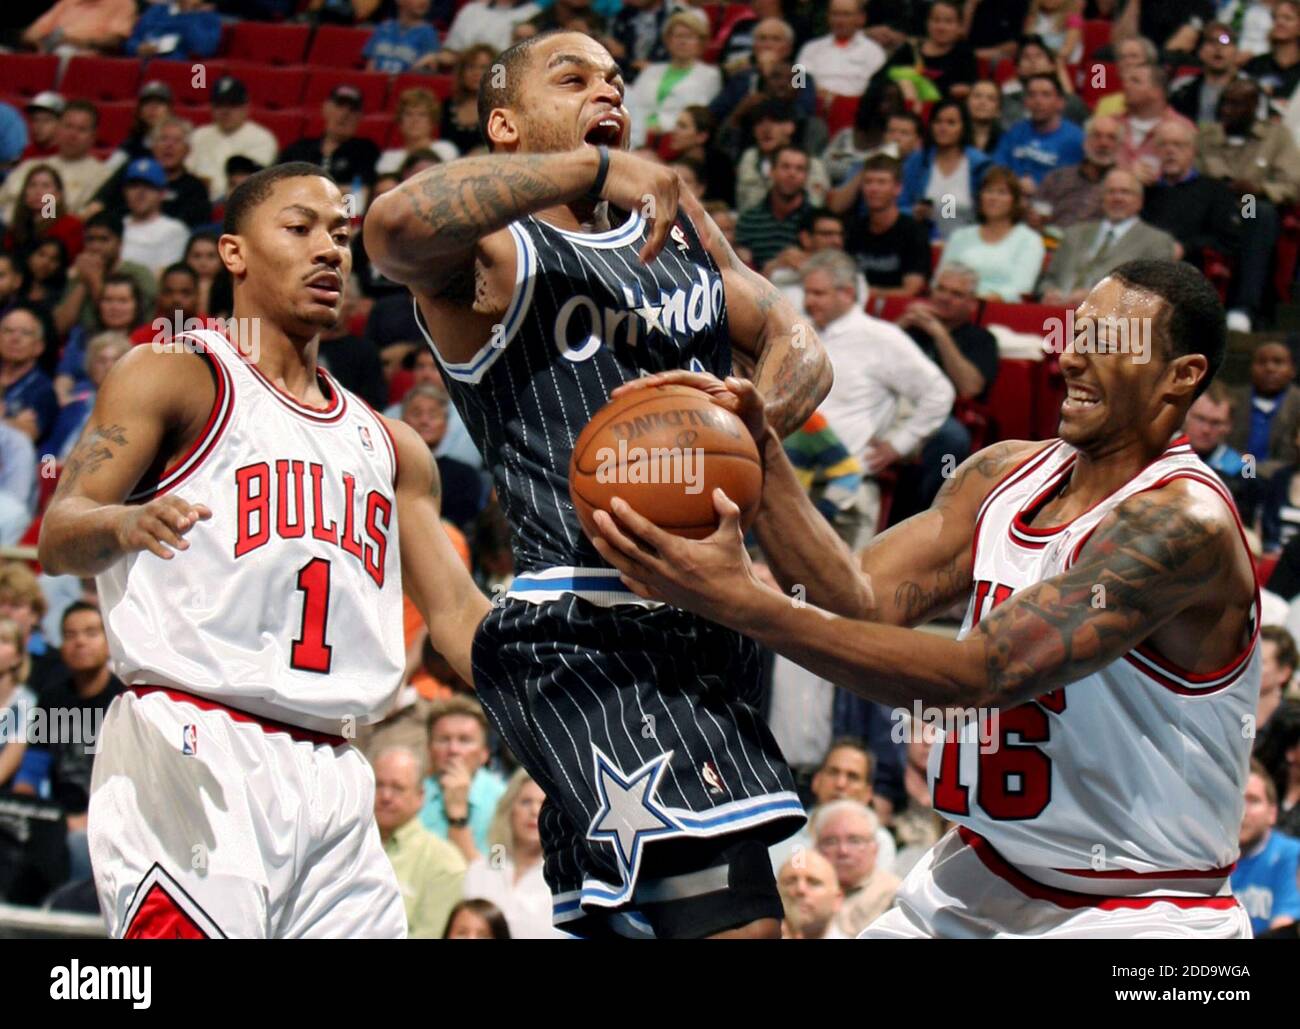 NO FILM, NO VIDEO, NO TV, NO DOCUMENTARY - Chicago Bulls guard Derrick Rose (1) and forward James Johnson (16) defends against Orlando Magic guard Jameer Nelson (14) during an NBA game at Amway Arena in Orlando, FL, USA on March 11, 2010. Photo by Stephen M. Dowell/Orlando Sentinel/MCT/Cameleon/ABACAPRESS.COM Stock Photo